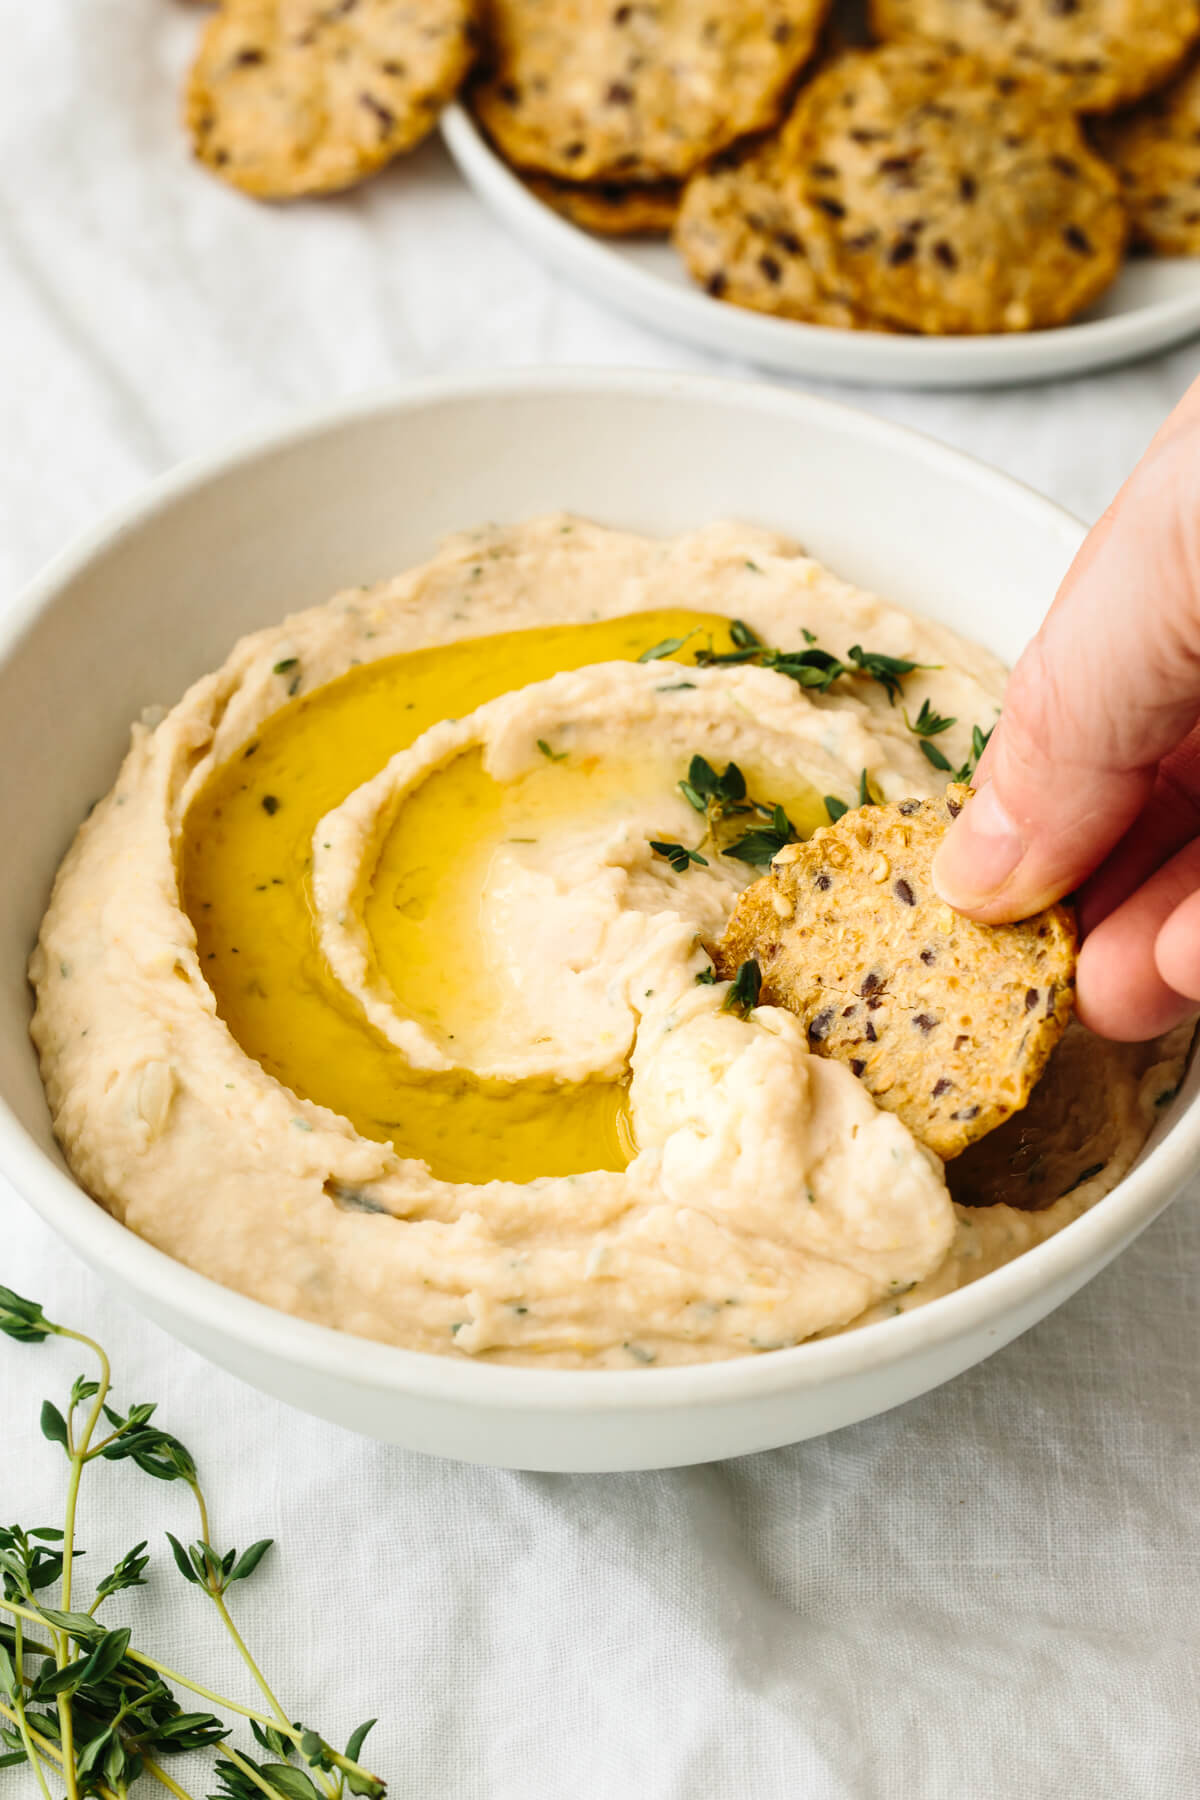 Scooping into a white bean dip with a cracker.